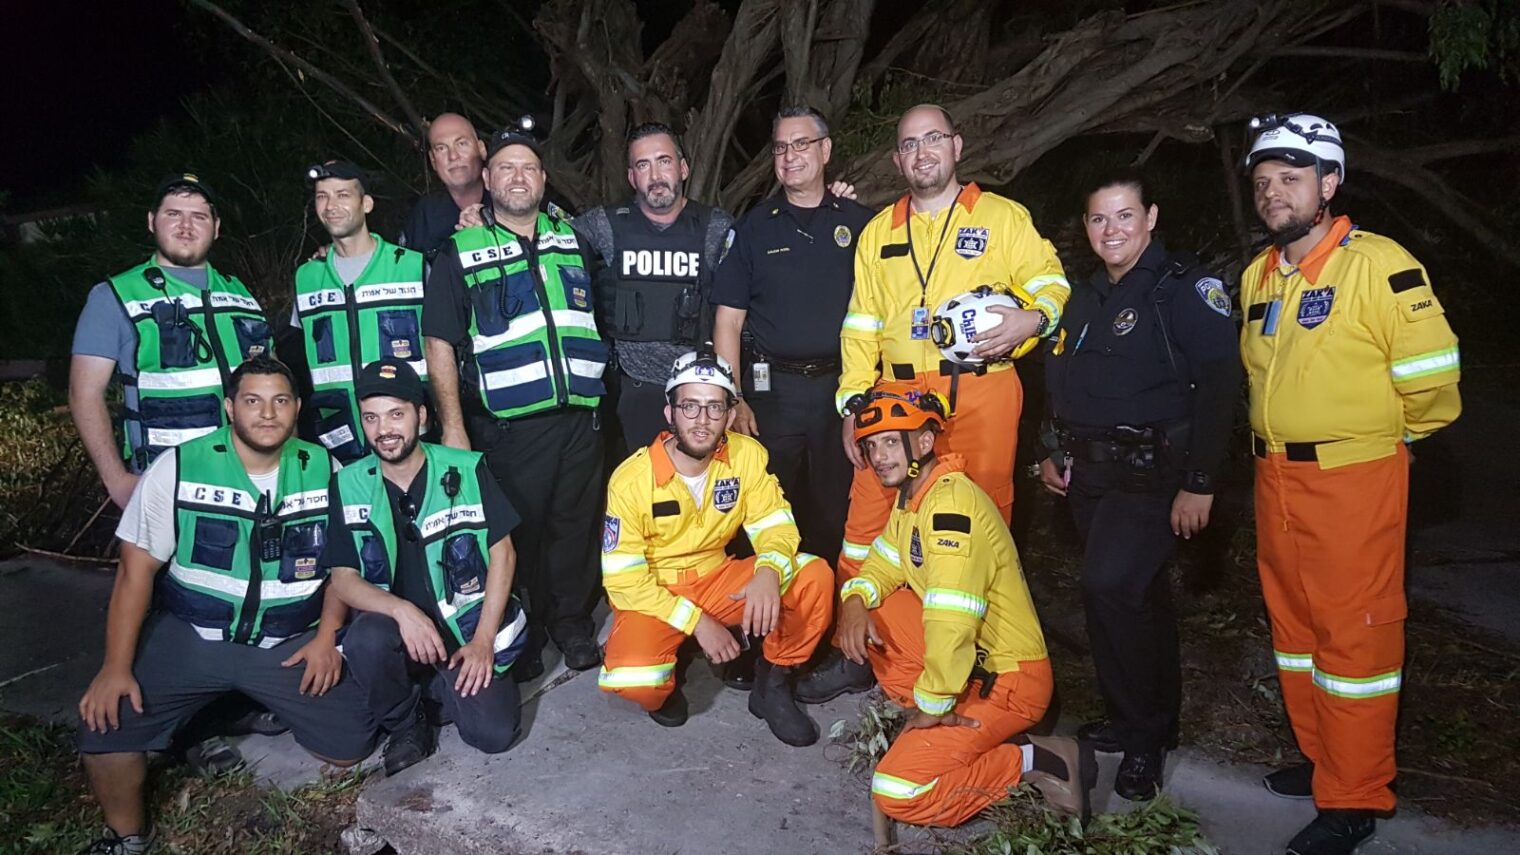 Israeli volunteers from ZAKA joined local relief organizations and police to help Floridians affected by Hurricane Irma. Photo: courtesy